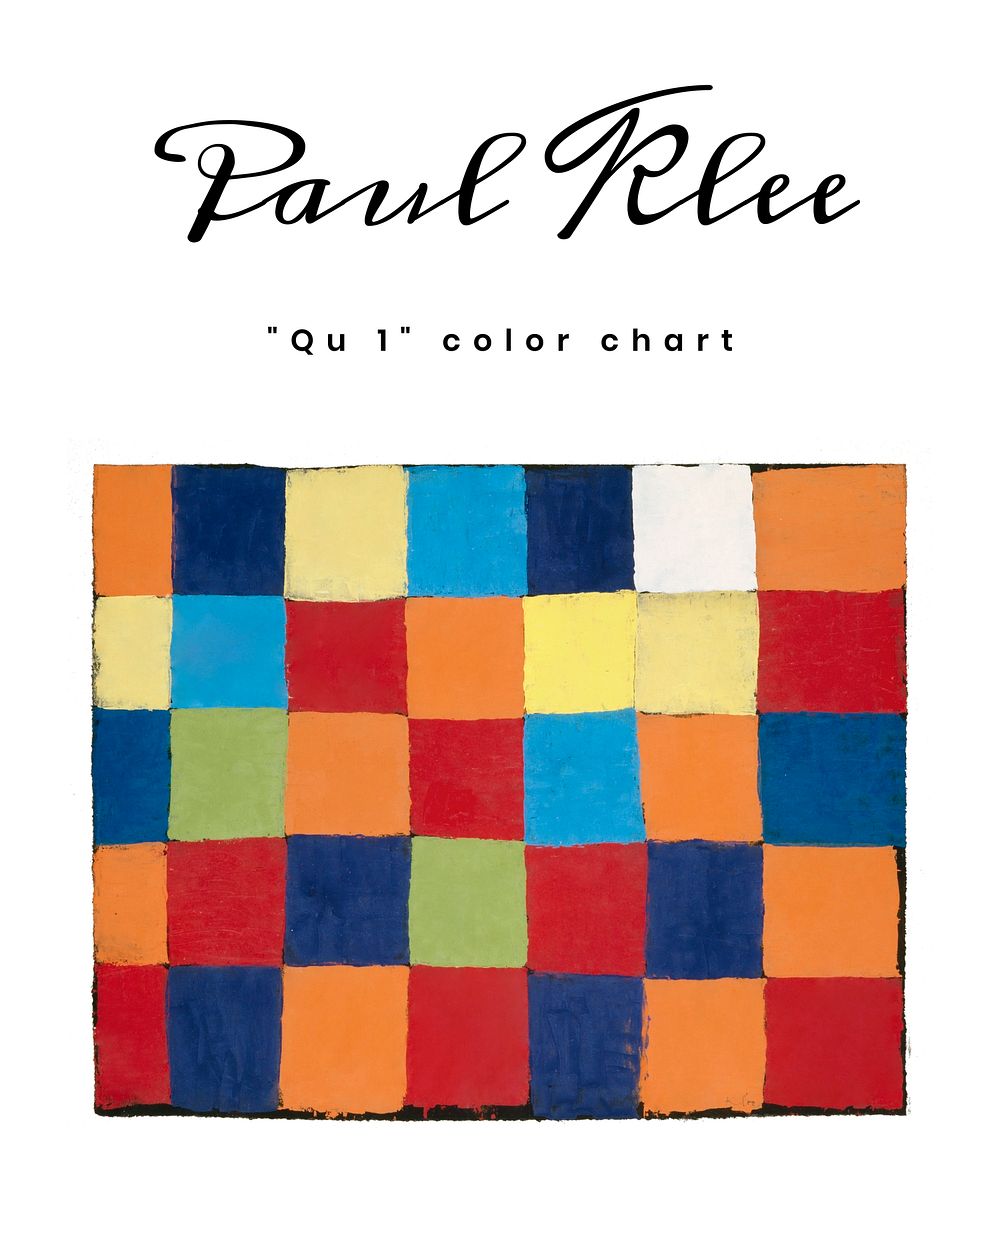 Paul Klee poster, printable "Qu 1" color chart painting (1930). Original from the Kunstmuseum Basel Museum. Digitally…